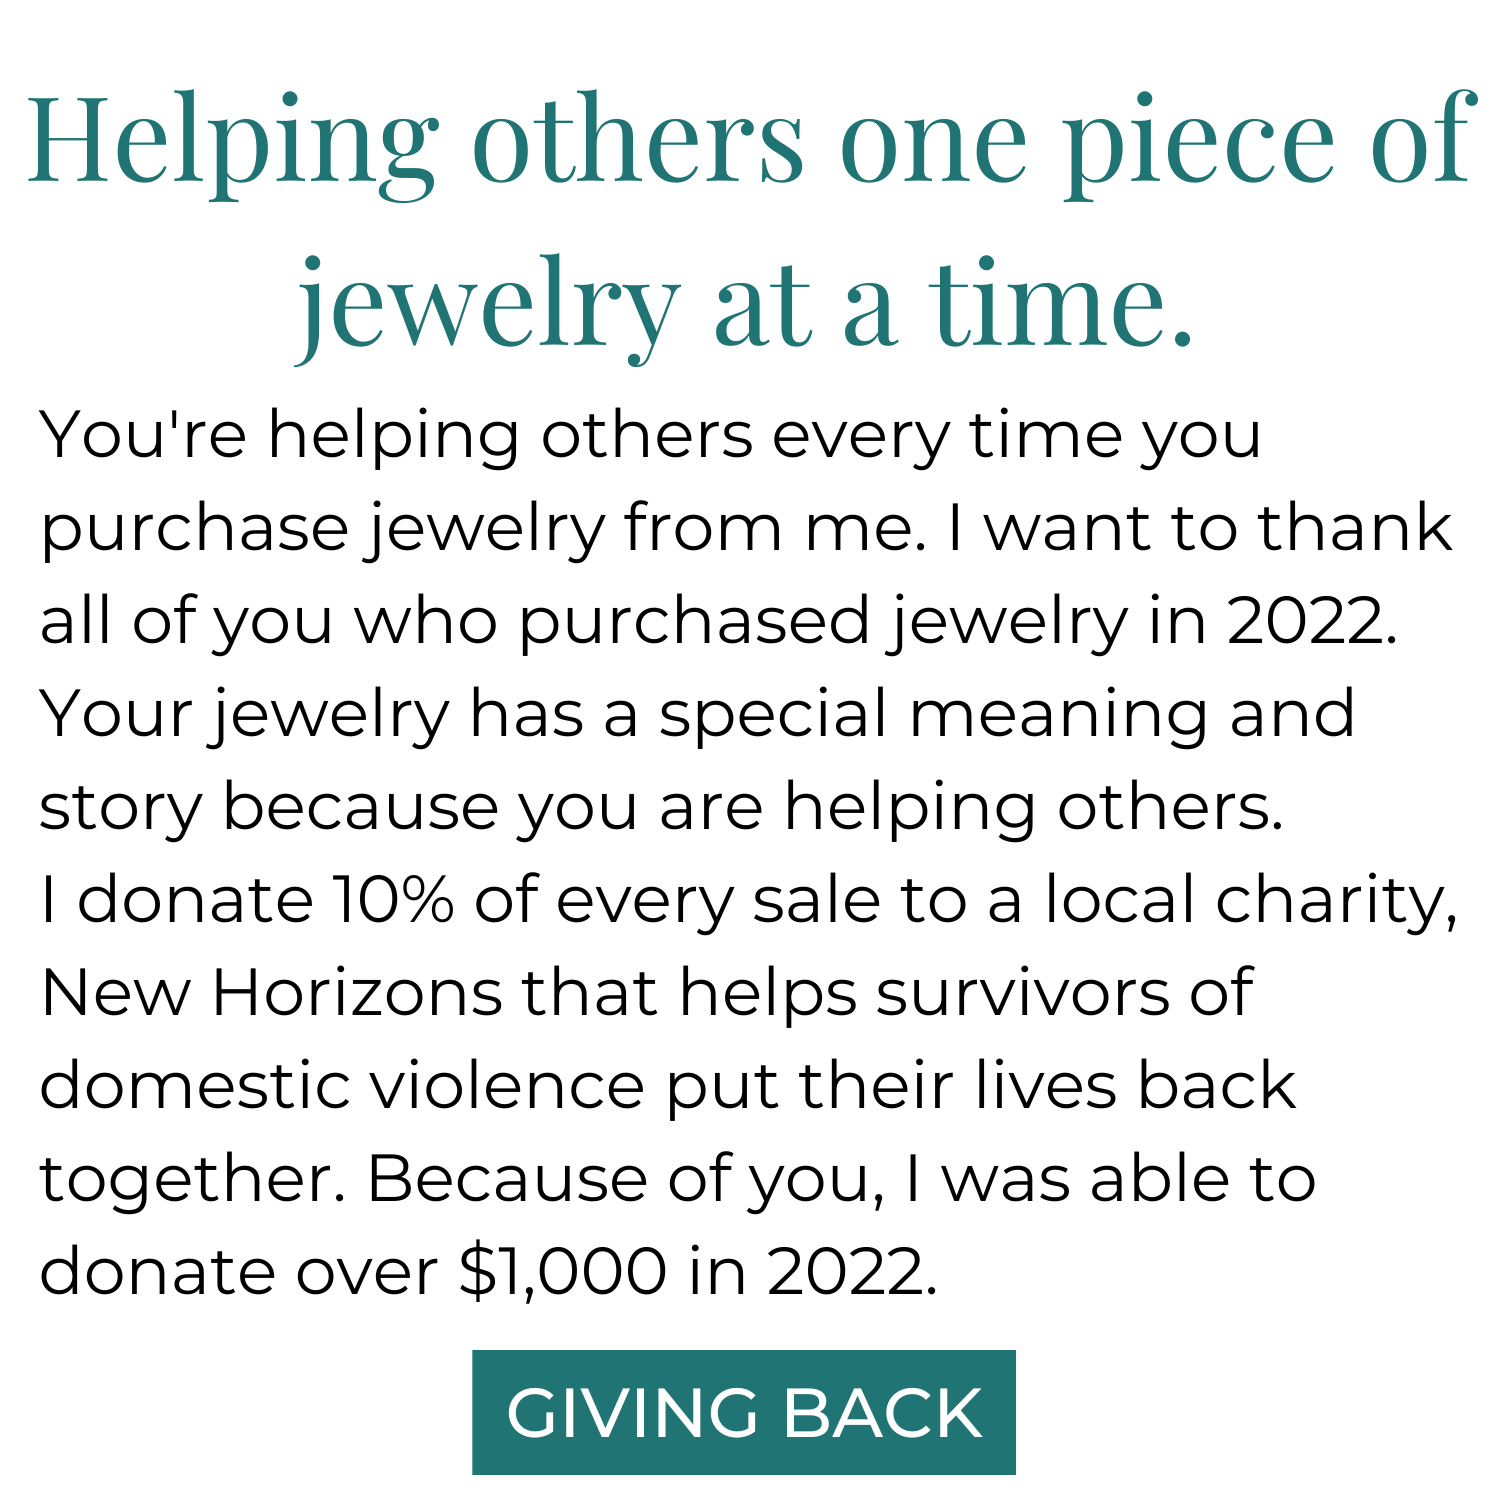 What Does It Mean When Someone Gives You a Necklace? – Fetchthelove Inc.